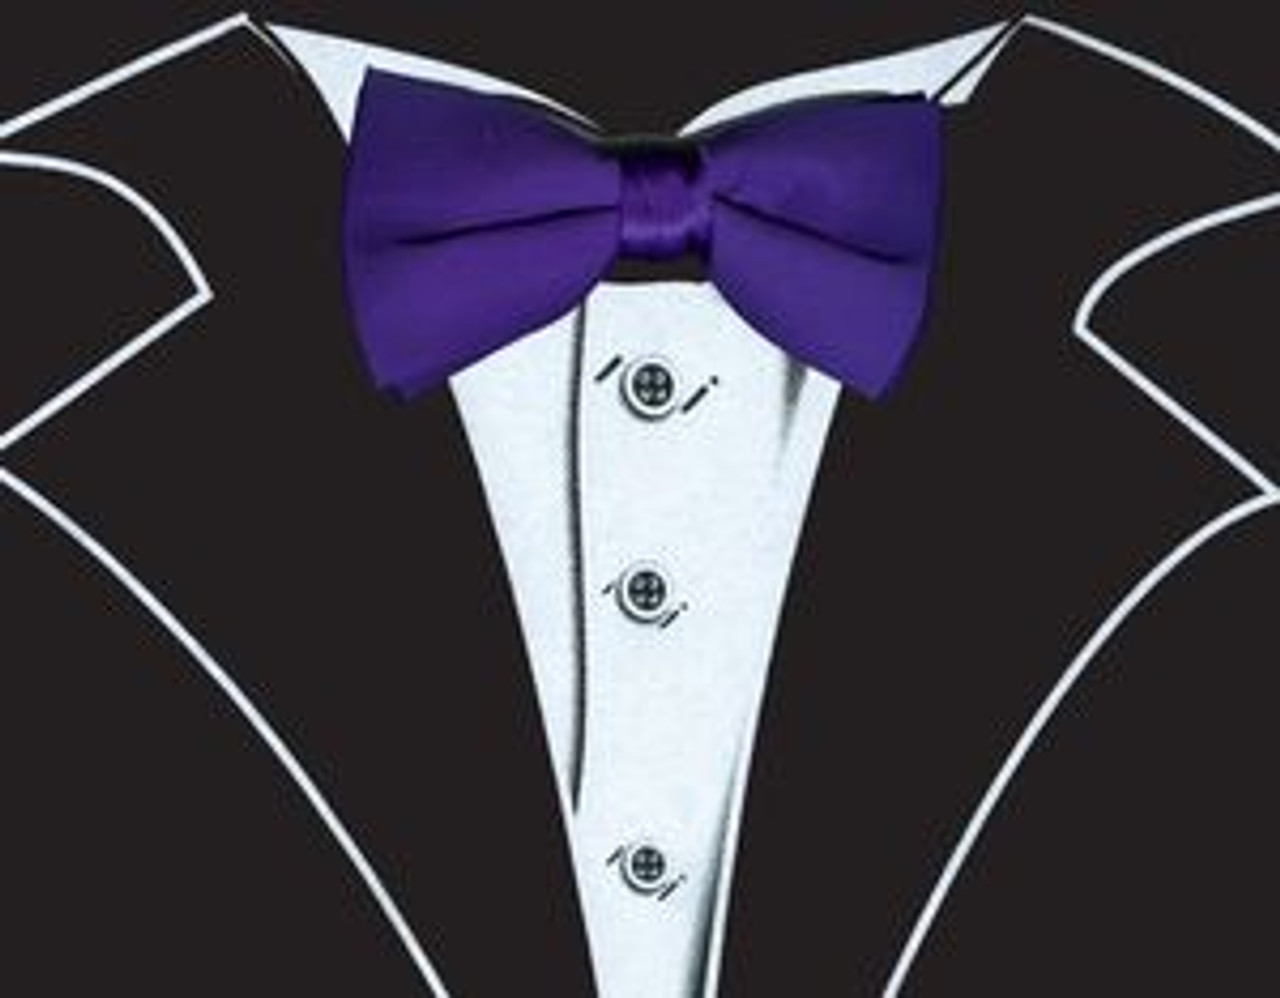 Tuxedo T Shirt In Black With Real Purple Bow Tie Shop Men S Tuxedo Tees - white and black tie roblox